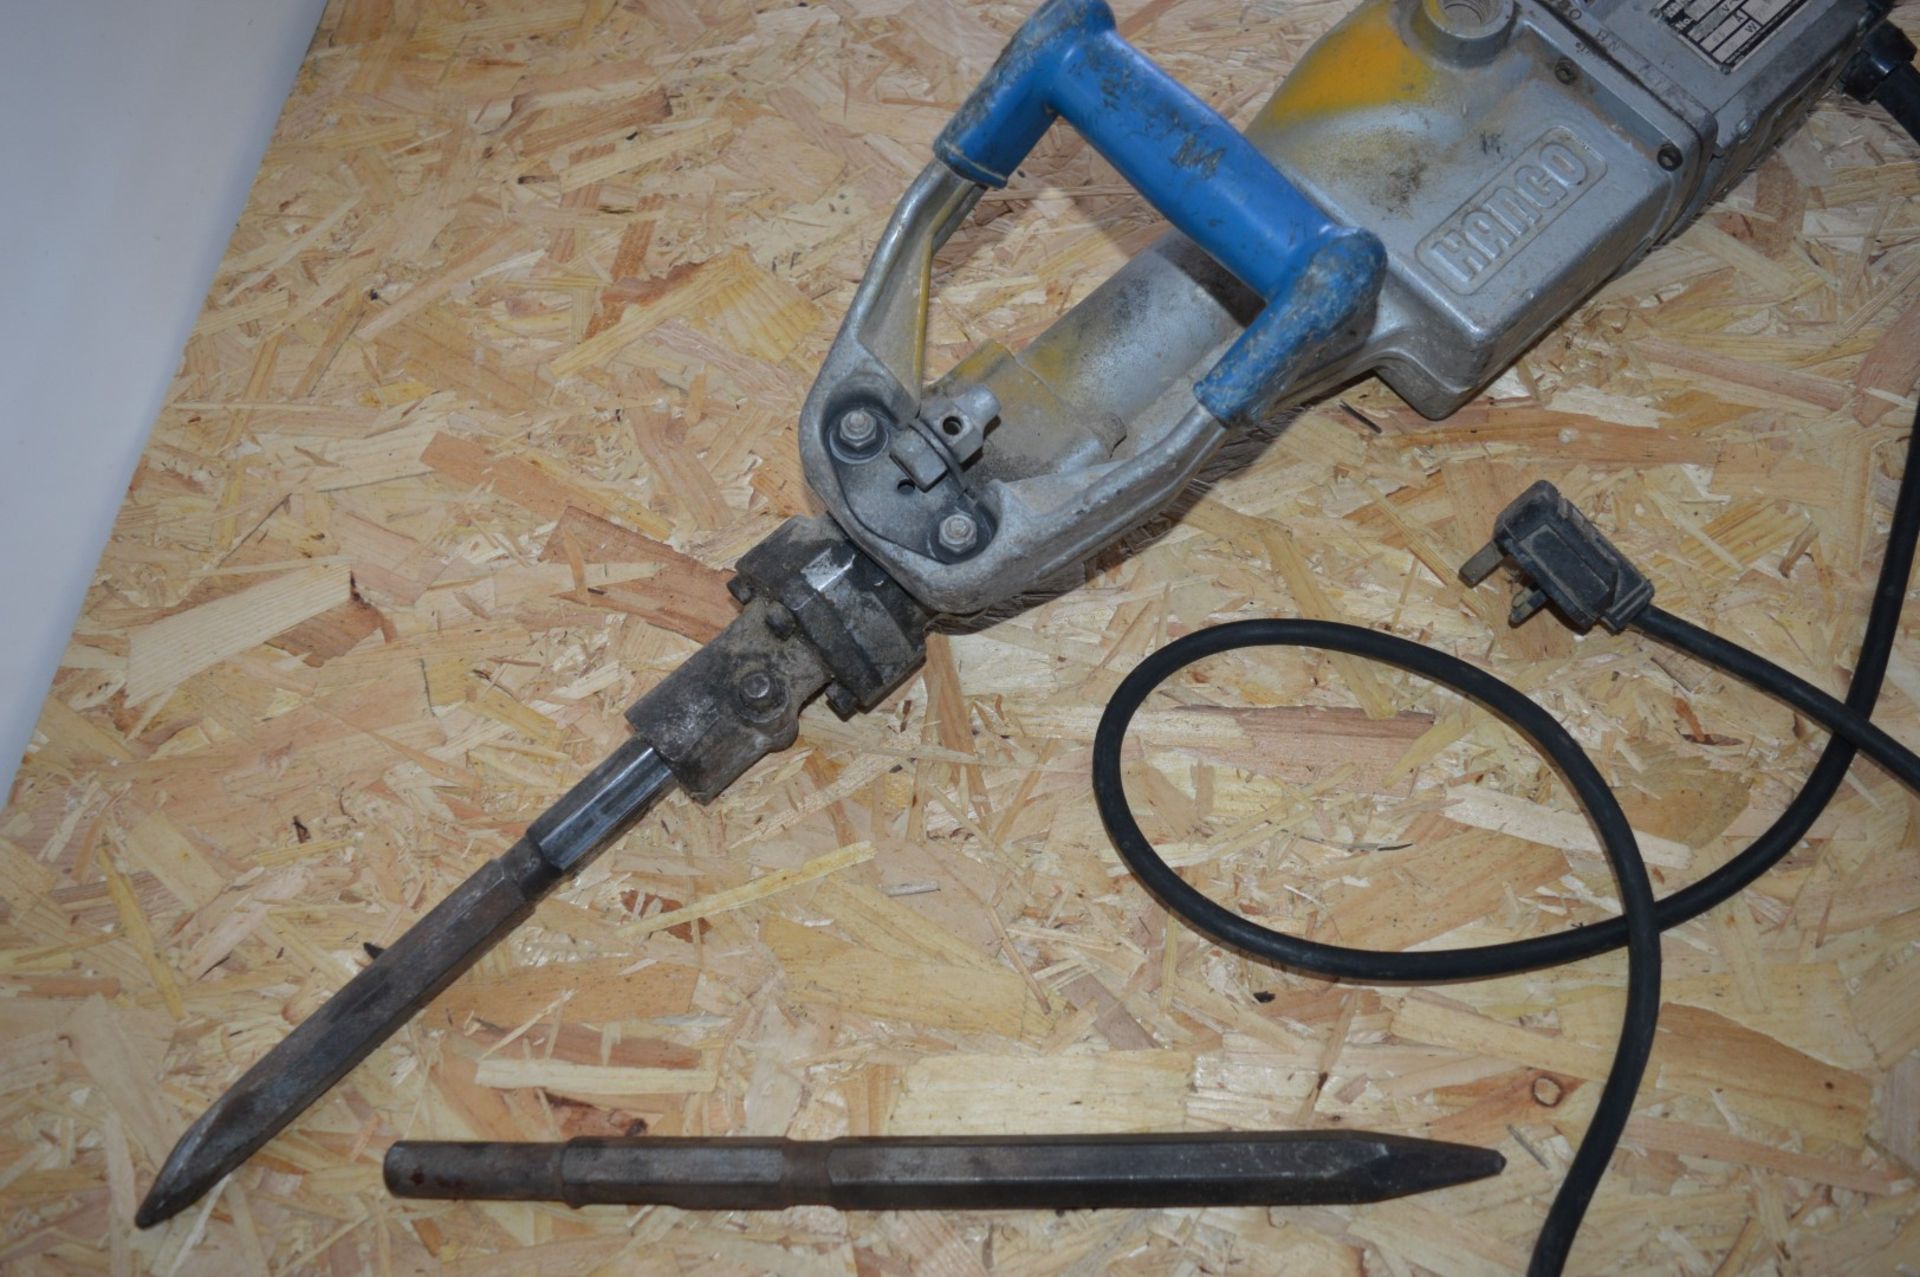 1 x Kango 950 Concrete Breaker / Hammer Drill With Two Drill Bits - 240v UK Plug - CL011 - Ref JP767 - Image 2 of 9